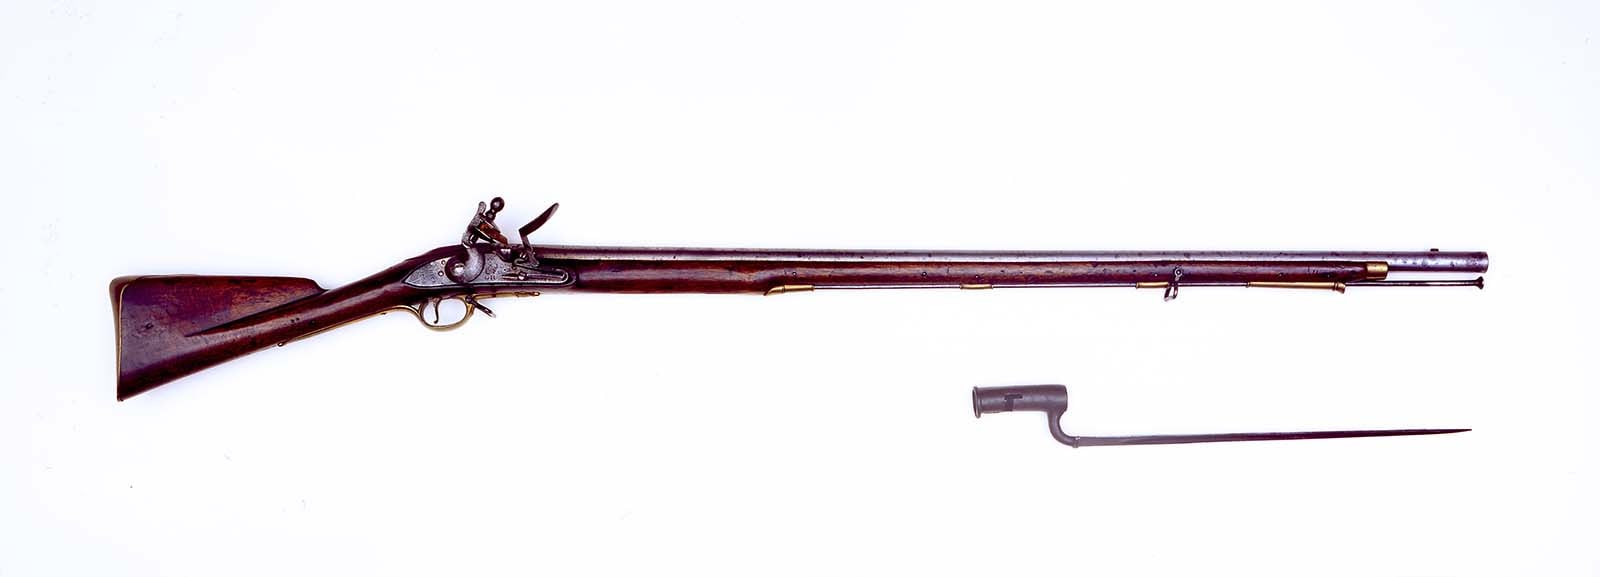 This "Brown Bess" that dates back to 1762 was actually carried by British infantry of the Second Battalion, Seventy-first Regiment Highlanders that served under General Cornwallis. Gift of Olin Corporation, Winchester Arms Collection. 1988.8.2514